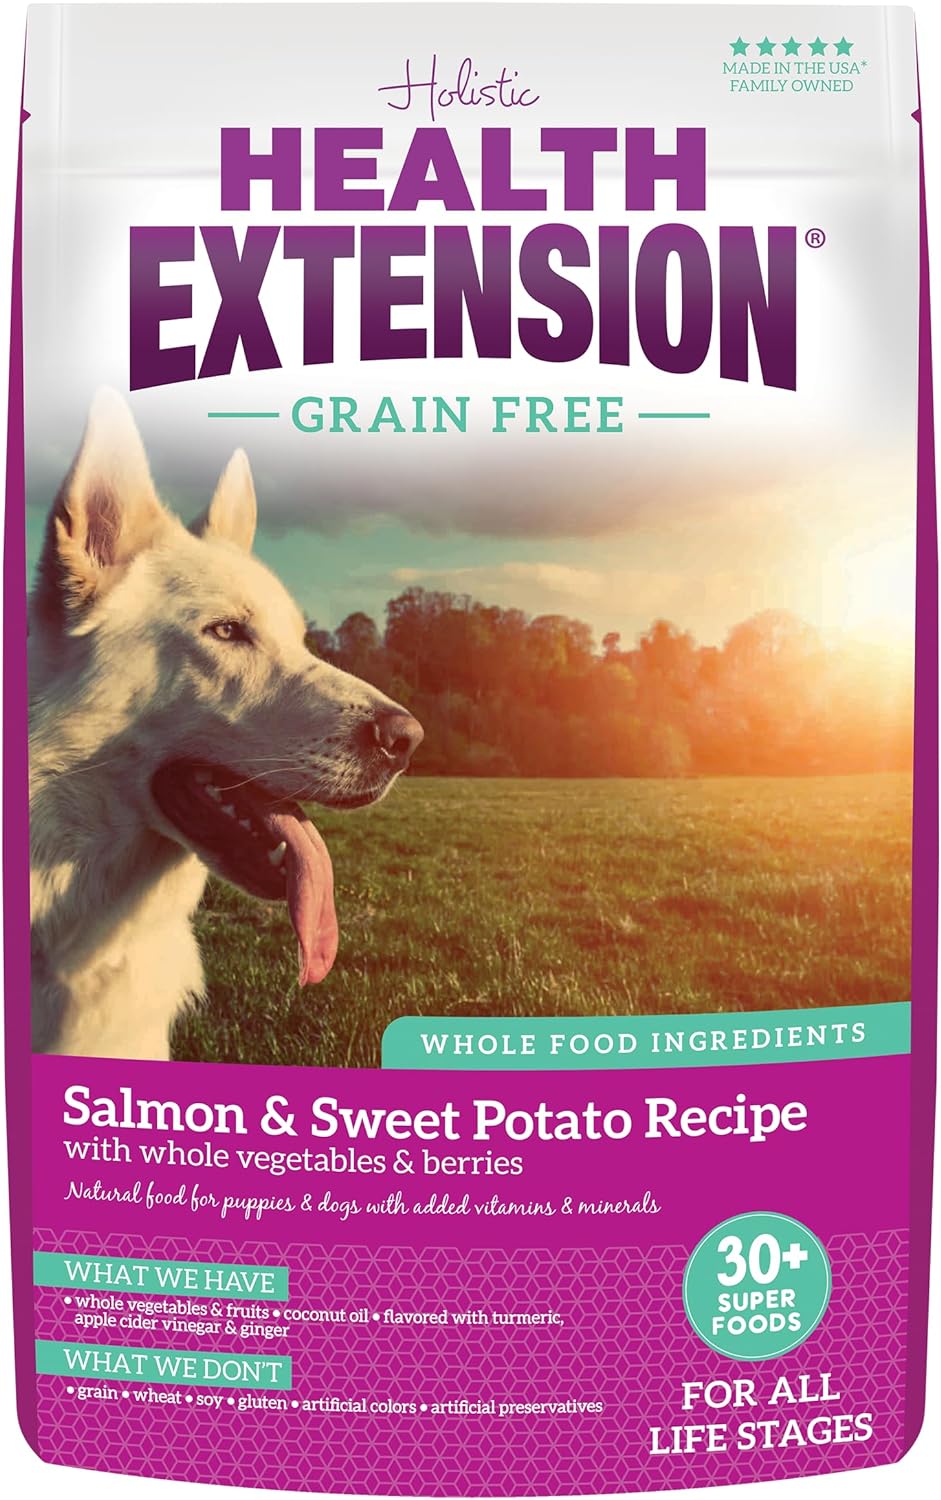 Health Extension Dry Dog Food, Natural Food with Added Vitamins & Minerals, Suitable for All Puppies, Grain Free, Salmon & Sweet Potato Recipe with Whole Vegetable & Berries (10 Pound)